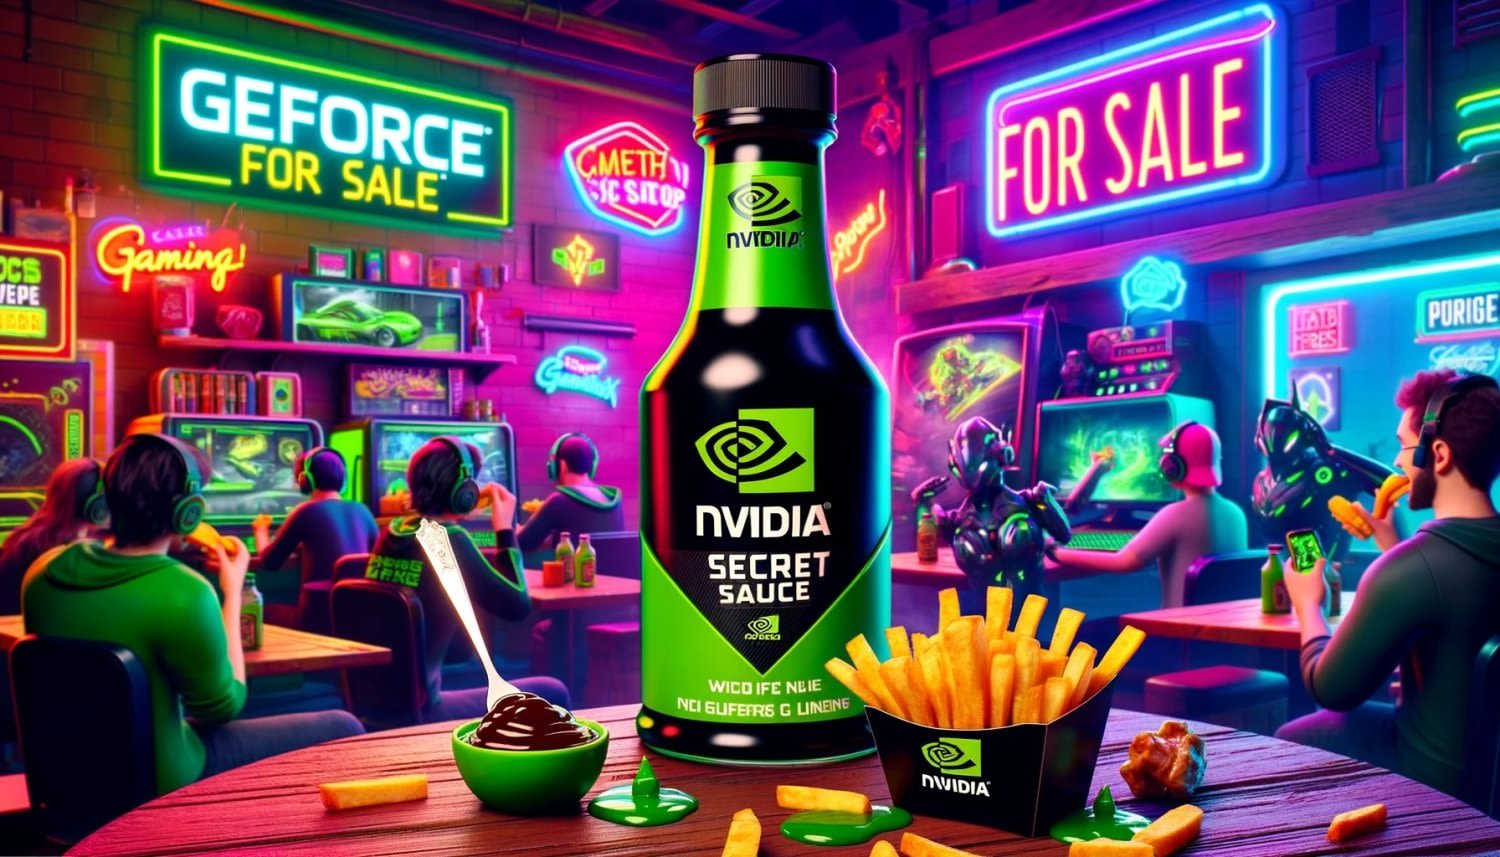 NVIDIA CEO says its secret sauce is one part persistence, resilience, belief and a huge vision